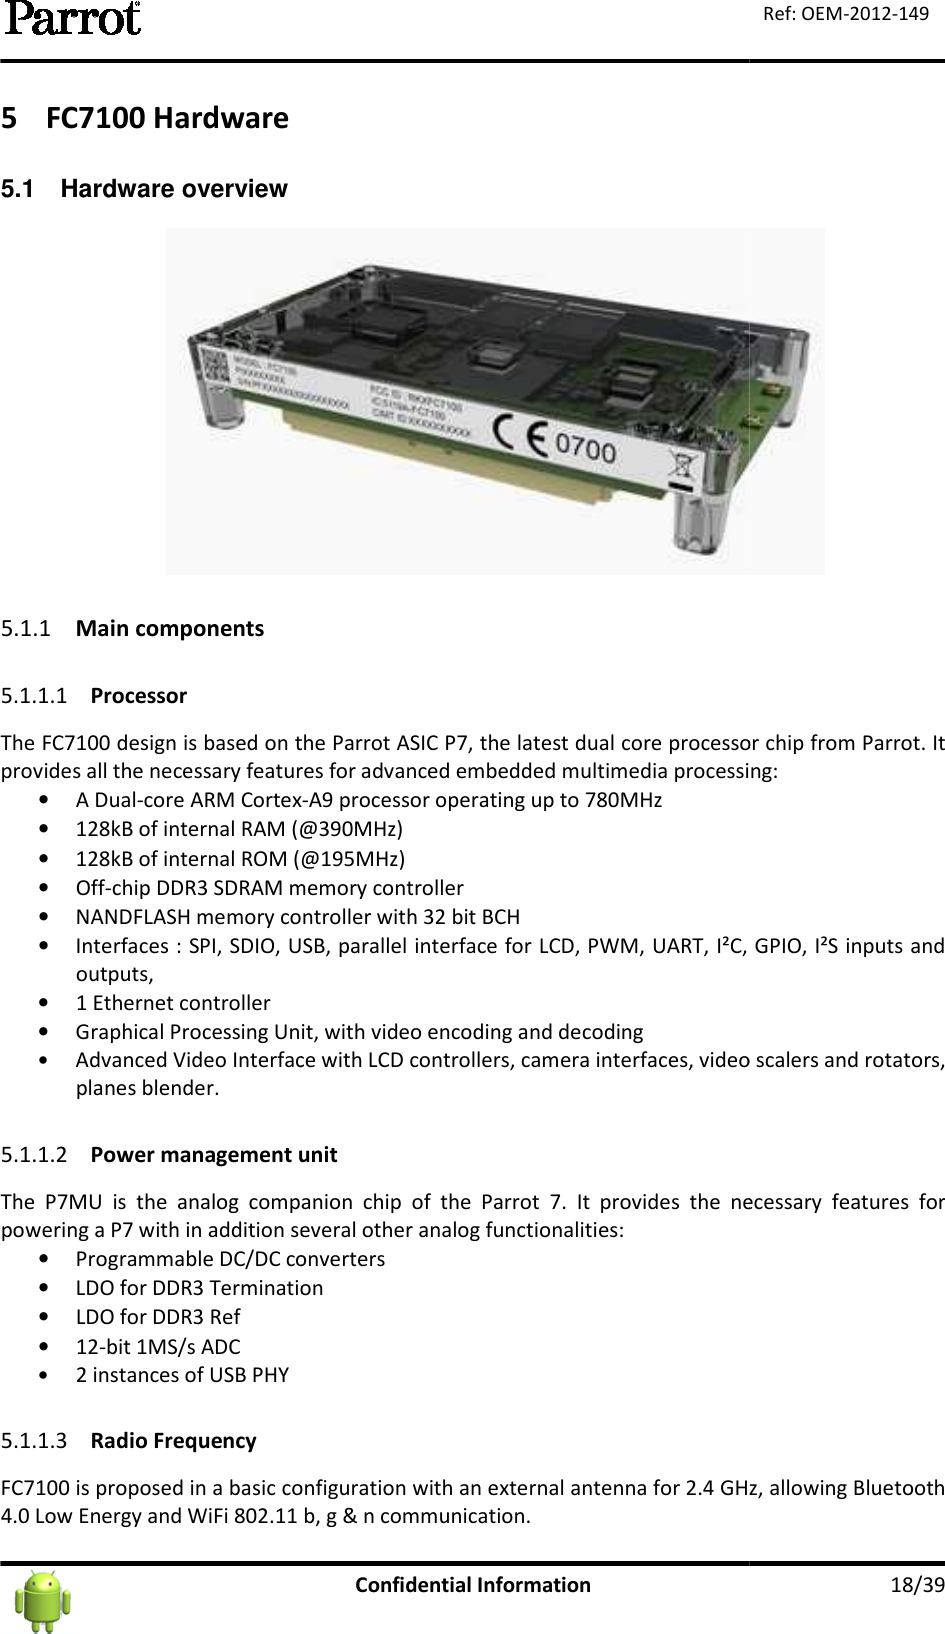   5 FC7100 Hardware 5.1  Hardware overview 5.1.1 Main components 5.1.1.1 Processor The FC7100 design is based on the Parrot Aprovides all the necessary features for advanced embedded multimedia processing:• A Dual-core ARM Cortex• 128kB of internal RAM (@390MHz)• 128kB of internal ROM (@195MH• Off-chip DDR3 SDRAM memory controller• NANDFLASH memory controller with 32 bit BCH• Interfaces : SPI, SDIO, USB, parallel interface for LCD, PWM, UART, I²C, GPIO, I²S inputs and outputs,  • 1 Ethernet controller • Graphical Processing Unit, with video encodin• Advanced Video Interface with LCD controllers, camera interfaces, video scalers and rotators, planes blender.  5.1.1.2 Power management unitThe  P7MU  is  the  analog  companion  chip  of  the  Parrot  7.  It  provides  the  necessary  features  for powering a P7 with in addition several other analog functionalities:• Programmable DC/DC converters• LDO for DDR3 Termination• LDO for DDR3 Ref • 12-bit 1MS/s ADC • 2 instances of USB PHY  5.1.1.3 Radio Frequency FC7100 is proposed in a basic configuration with an external antenna for4.0 Low Energy and WiFi 802.11 Confidential Information   The FC7100 design is based on the Parrot ASIC P7, the latest dual core processor chip from Parrot. It provides all the necessary features for advanced embedded multimedia processing:core ARM Cortex-A9 processor operating up to 780MHz 128kB of internal RAM (@390MHz) 128kB of internal ROM (@195MHz) chip DDR3 SDRAM memory controller NANDFLASH memory controller with 32 bit BCH Interfaces : SPI, SDIO, USB, parallel interface for LCD, PWM, UART, I²C, GPIO, I²S inputs and Graphical Processing Unit, with video encoding and decoding Advanced Video Interface with LCD controllers, camera interfaces, video scalers and rotators, Power management unit The  P7MU  is  the  analog  companion  chip  of  the  Parrot  7.  It  provides  the  necessary  features  for with in addition several other analog functionalities: Programmable DC/DC converters LDO for DDR3 Termination  FC7100 is proposed in a basic configuration with an external antenna for 2.4 GHz, allowing Bluetooth  b, g &amp; n communication.    18/39 Ref: OEM-2012-149  7, the latest dual core processor chip from Parrot. It provides all the necessary features for advanced embedded multimedia processing: Interfaces : SPI, SDIO, USB, parallel interface for LCD, PWM, UART, I²C, GPIO, I²S inputs and Advanced Video Interface with LCD controllers, camera interfaces, video scalers and rotators, The  P7MU  is  the  analog  companion  chip  of  the  Parrot  7.  It  provides  the  necessary  features  for 2.4 GHz, allowing Bluetooth 